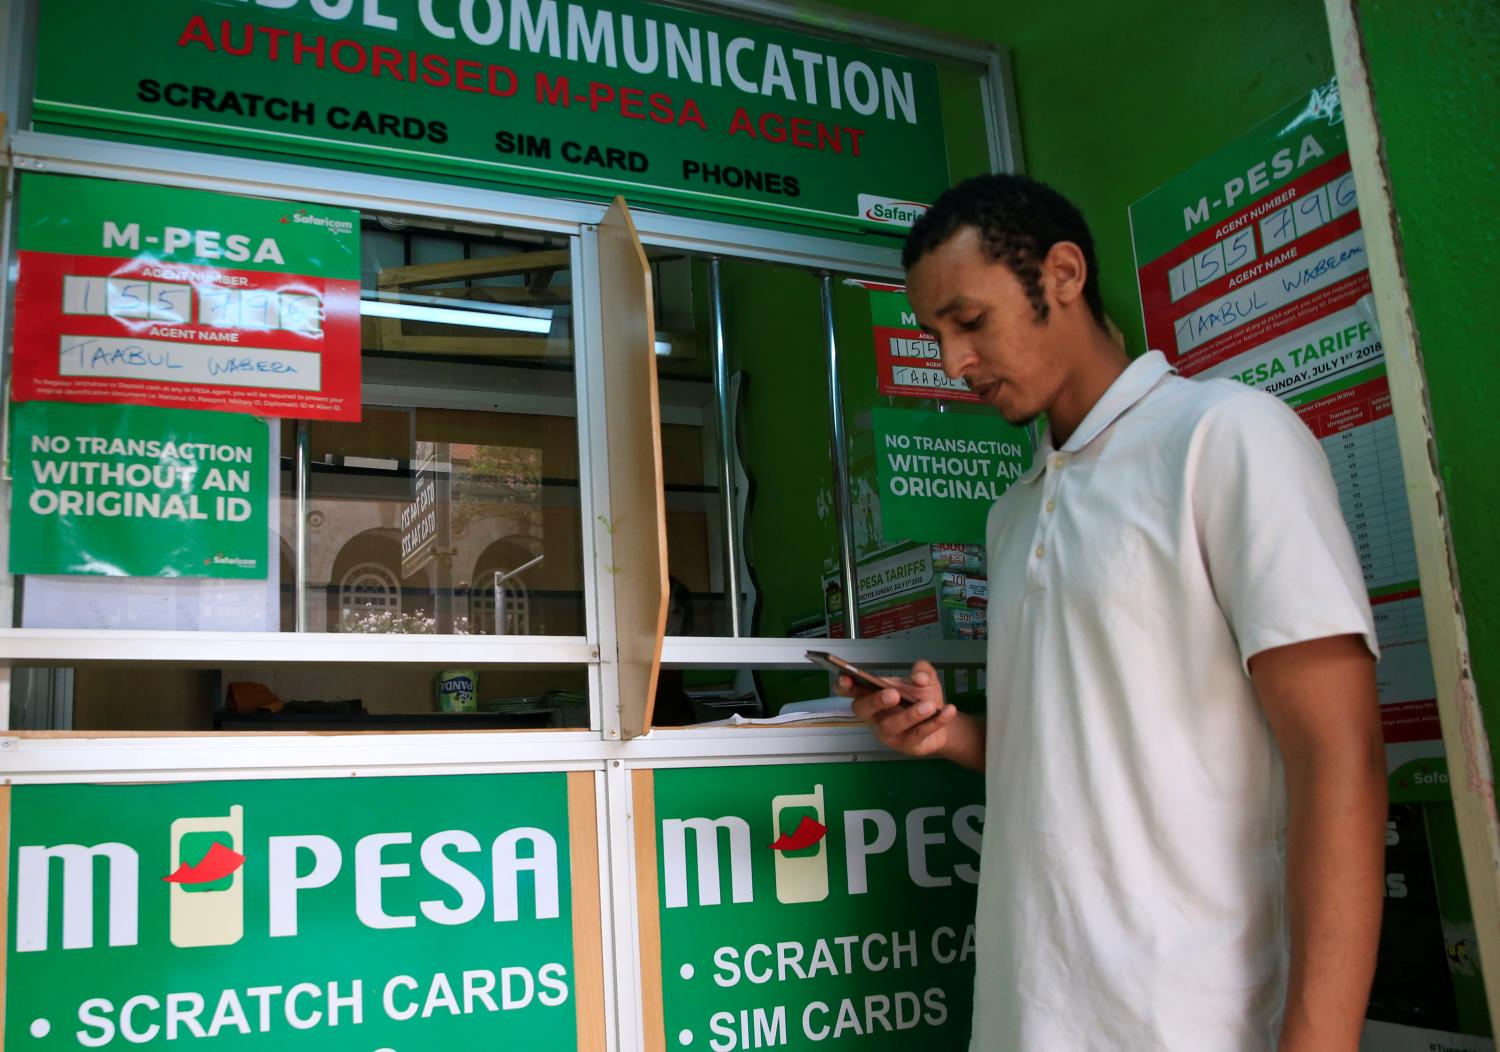 A customer conducts a mobile money transfer, known as M-Pesa, at a Safaricom agent stall in downtown Nairobi, Kenya October 16, 2018. REUTERS/Thomas Mukoya - RC13FA4477D0